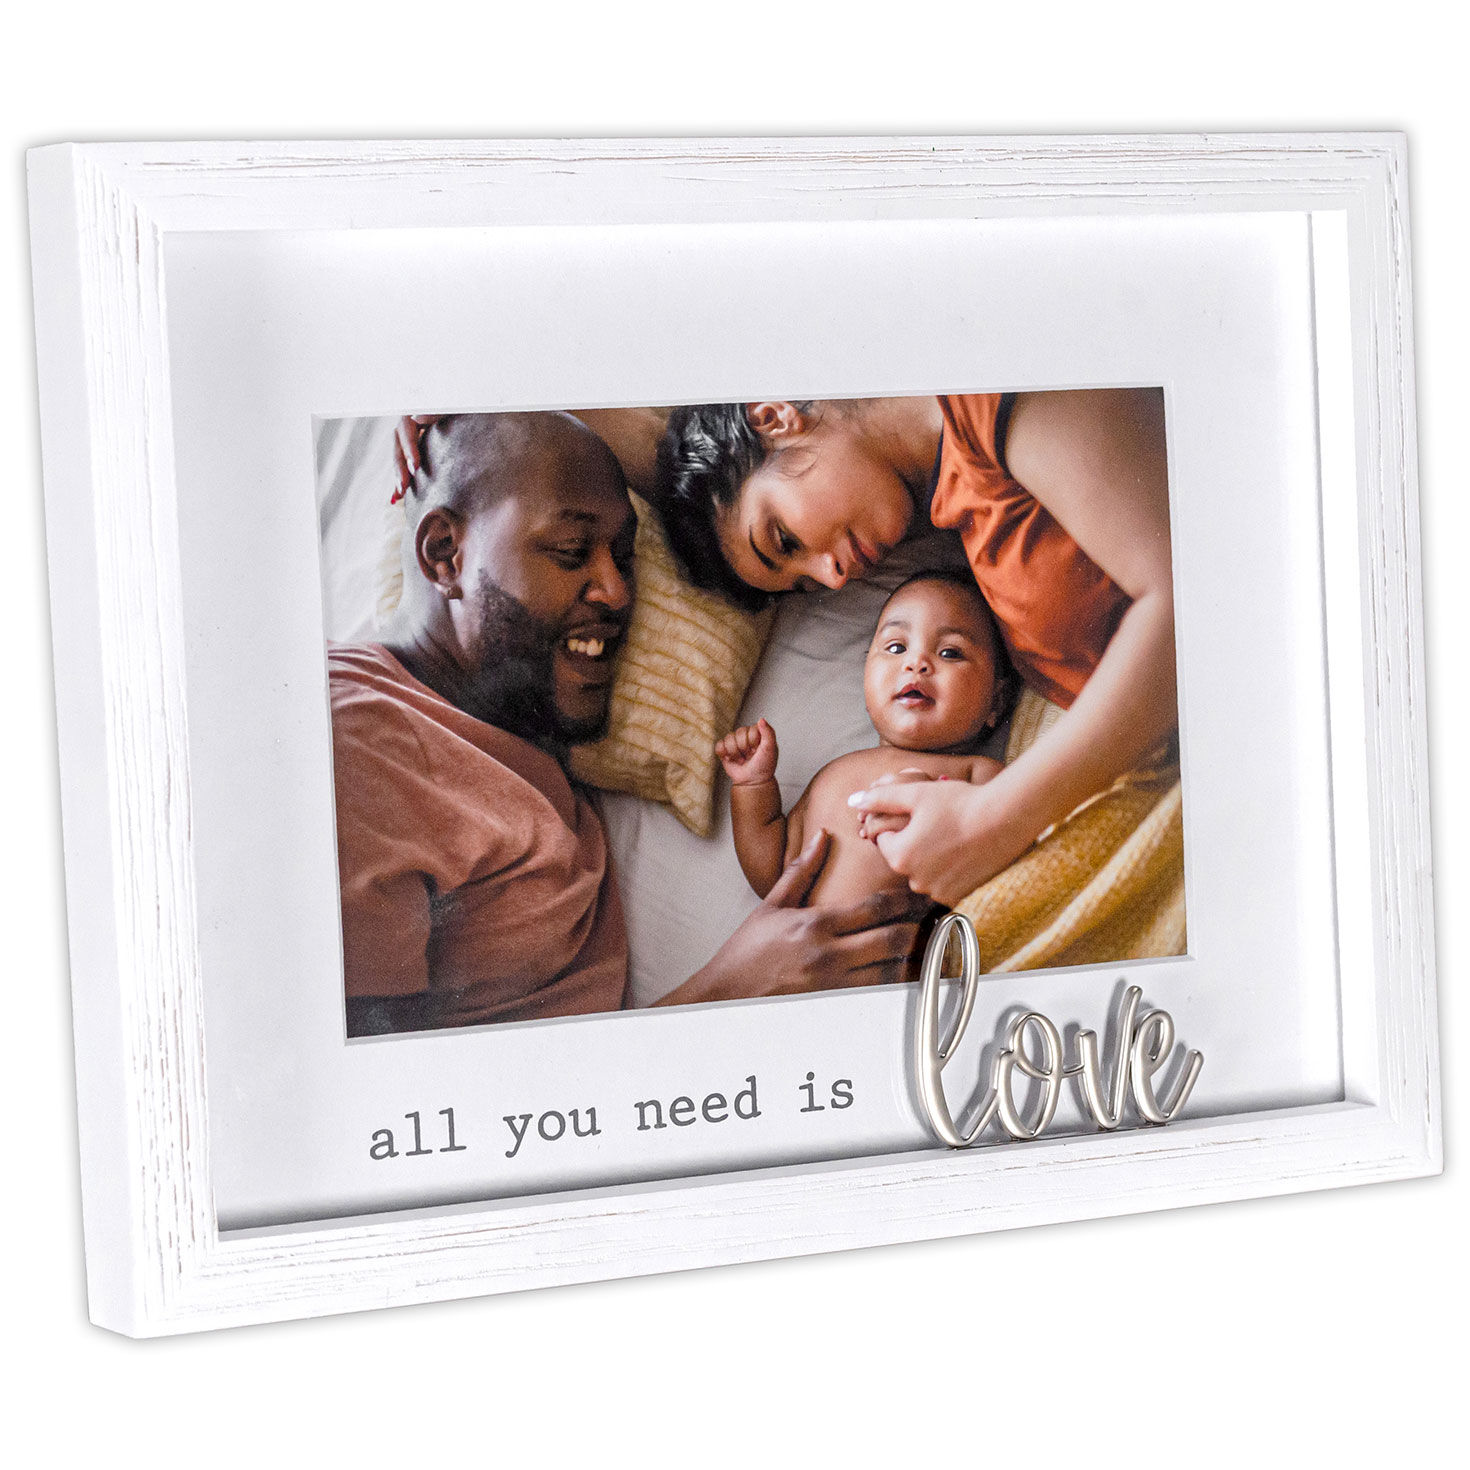 Make It Pop 4x6 Picture Frame